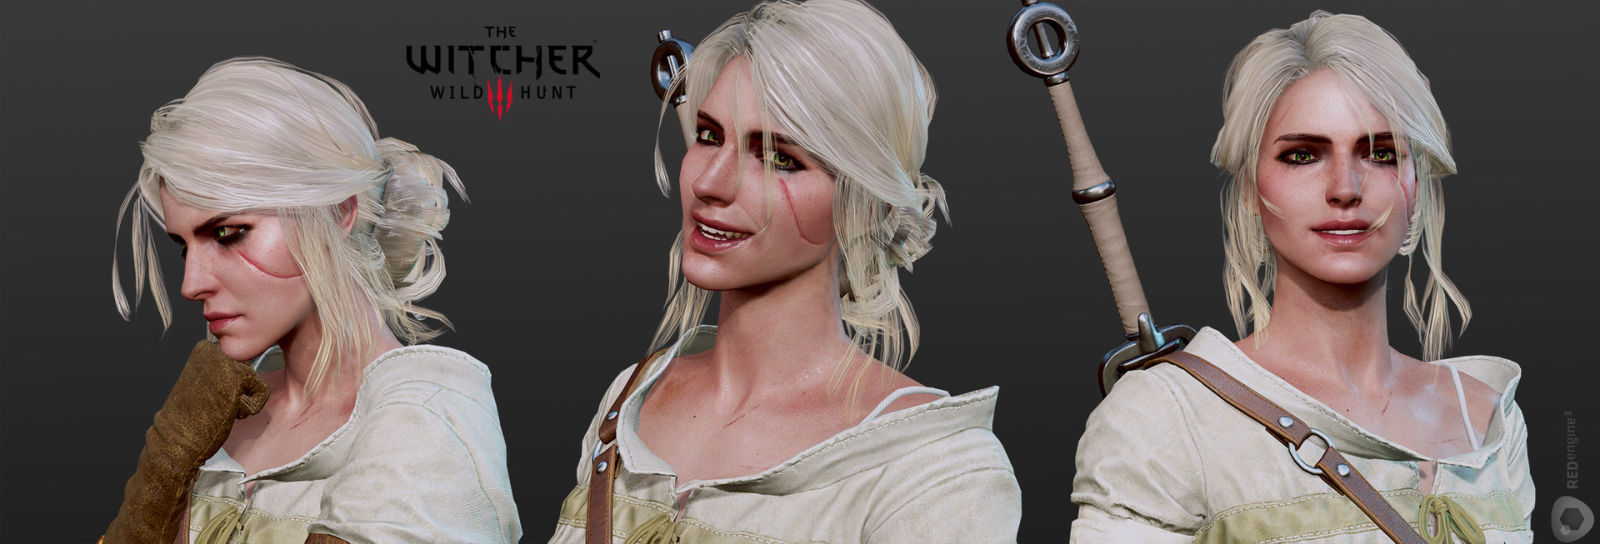 the witcher 22